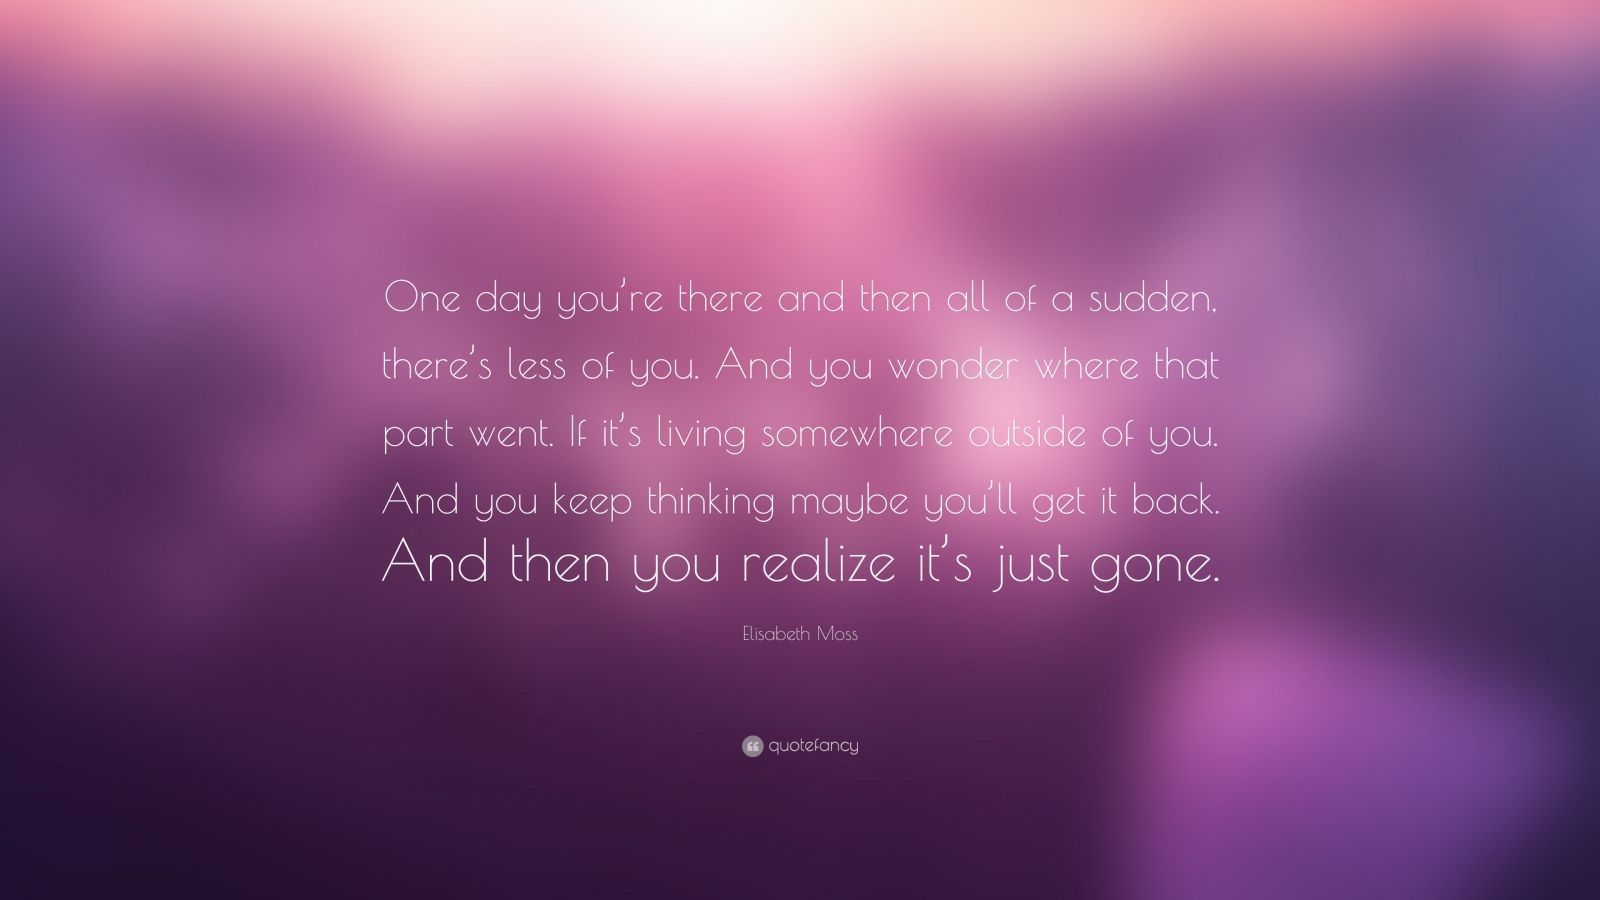 Elisabeth Moss Quote: “One day you’re there and then all of a sudden ...